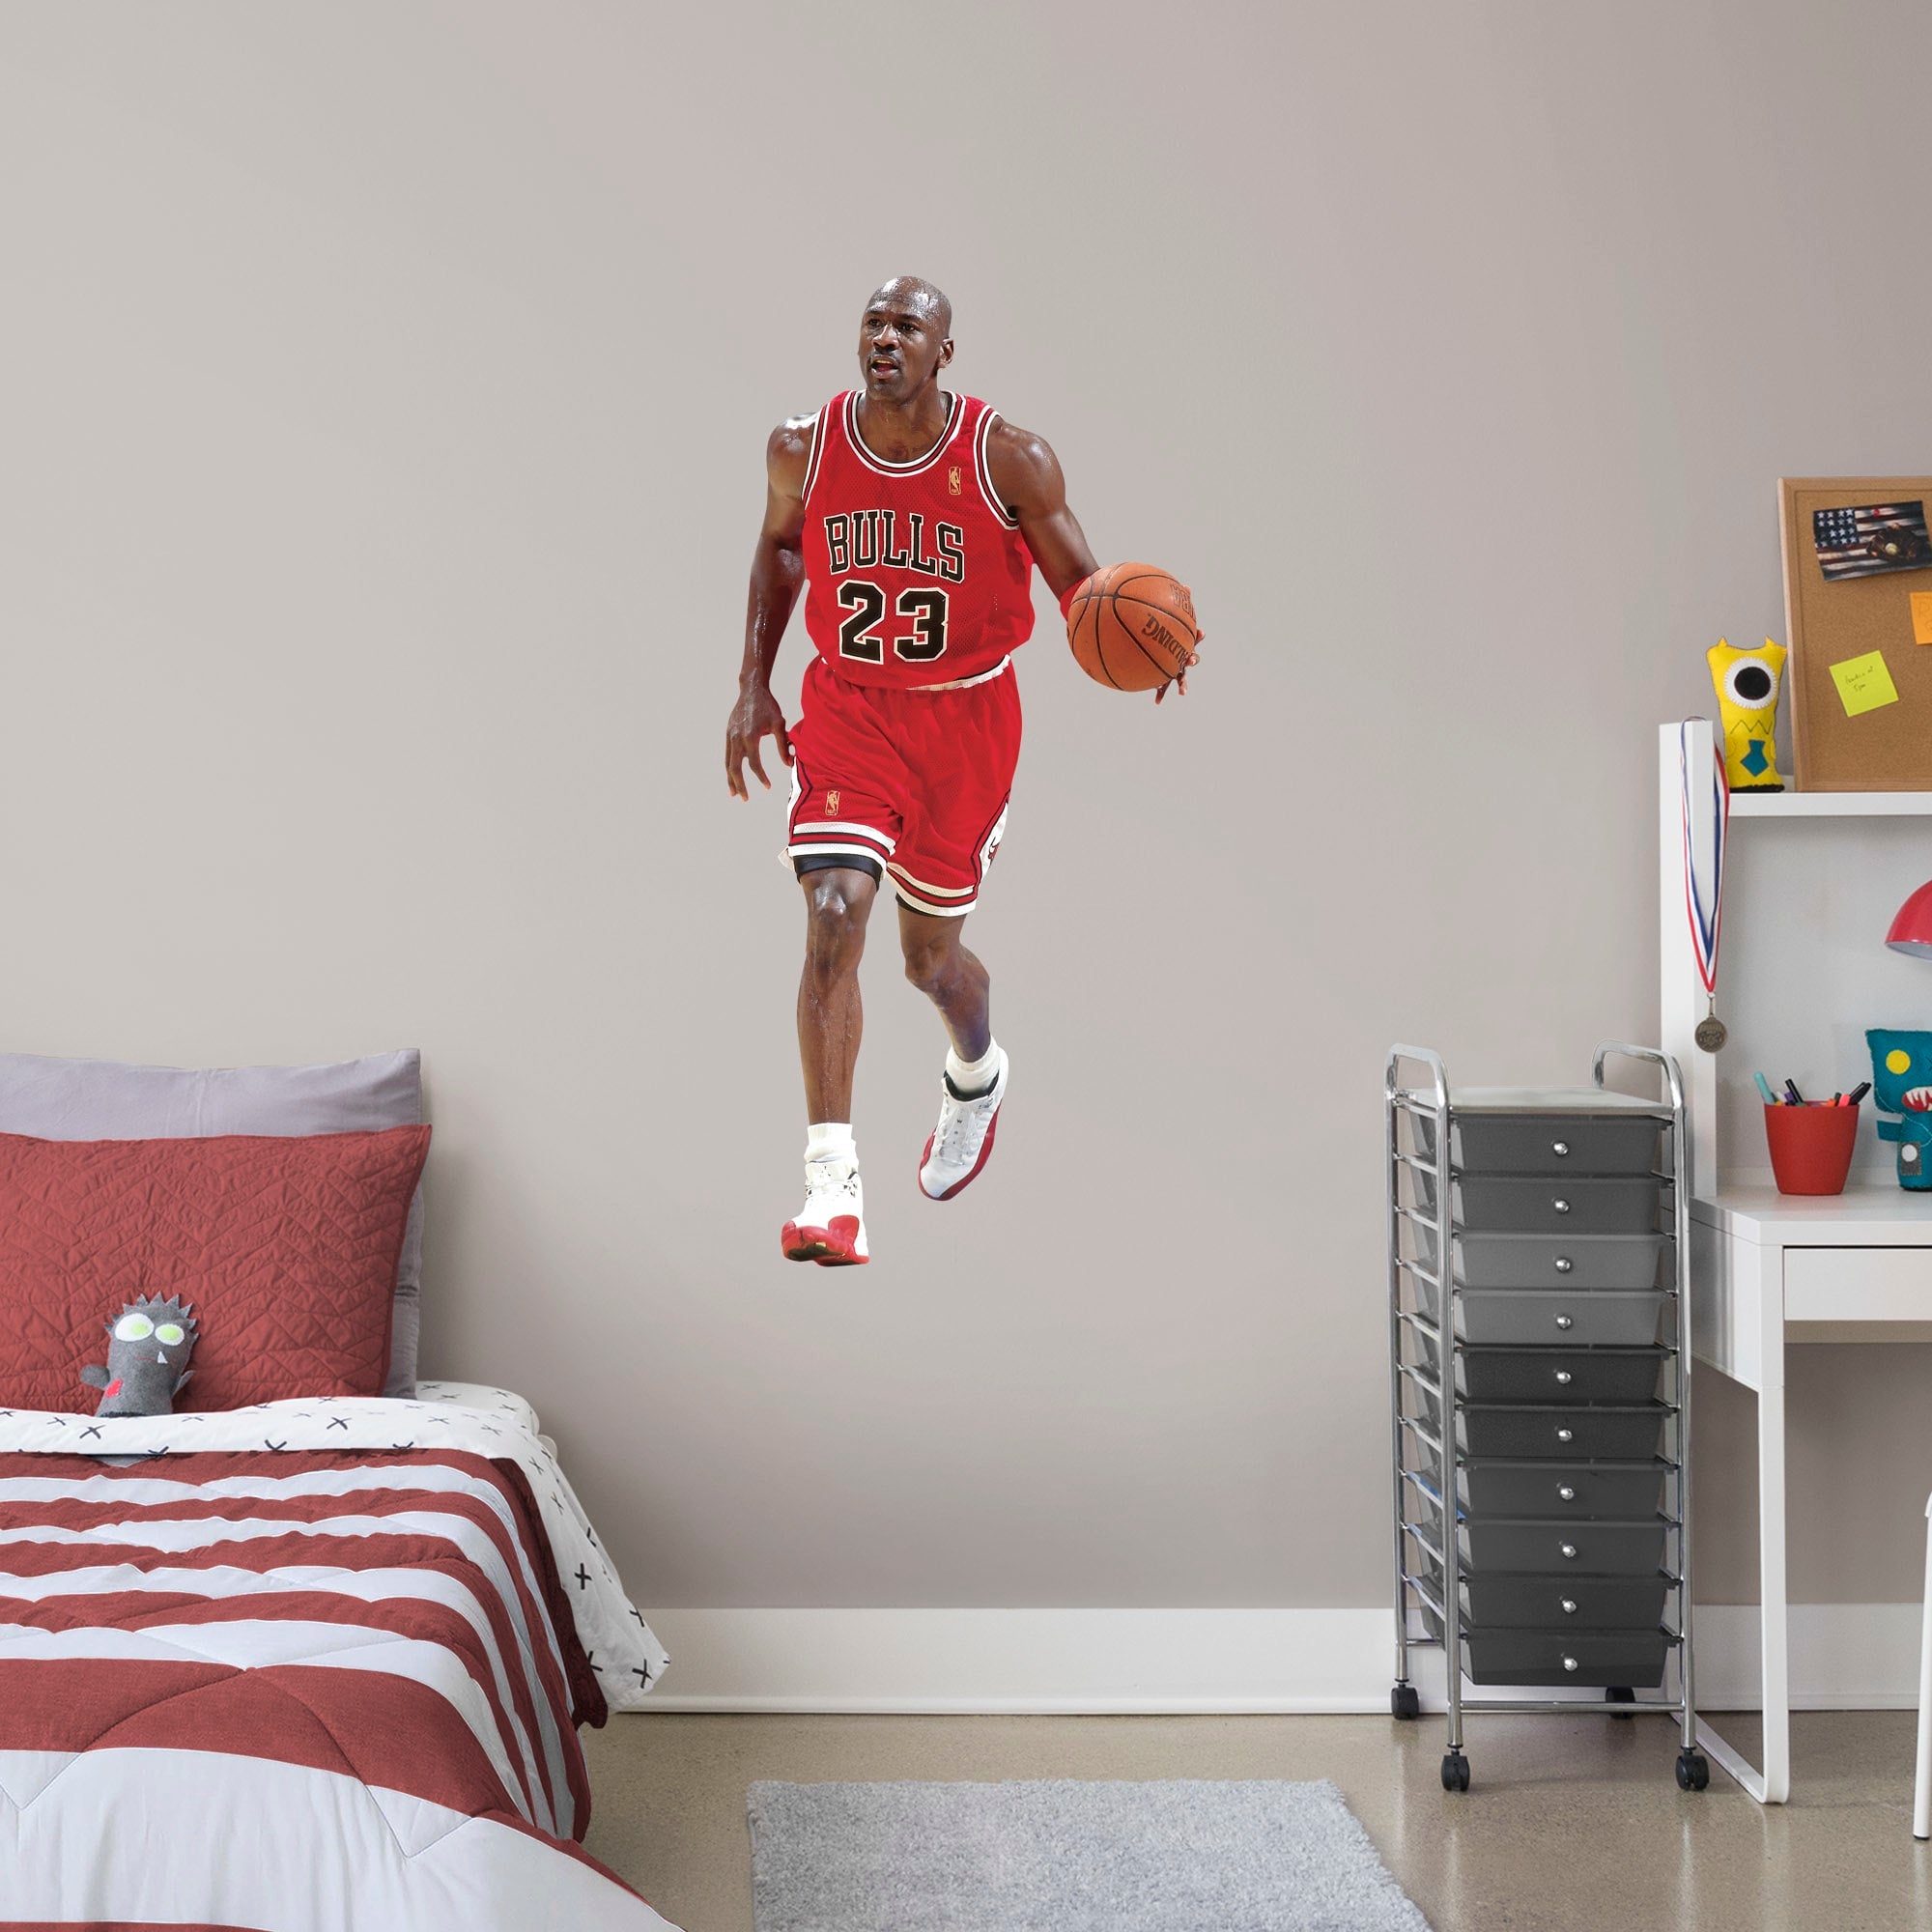 Michael Jordan for Chicago Bulls - Officially Licensed NBA Removable Wall Decal Giant Athlete + 2 Decals (25"W x 51"H) by Fathea